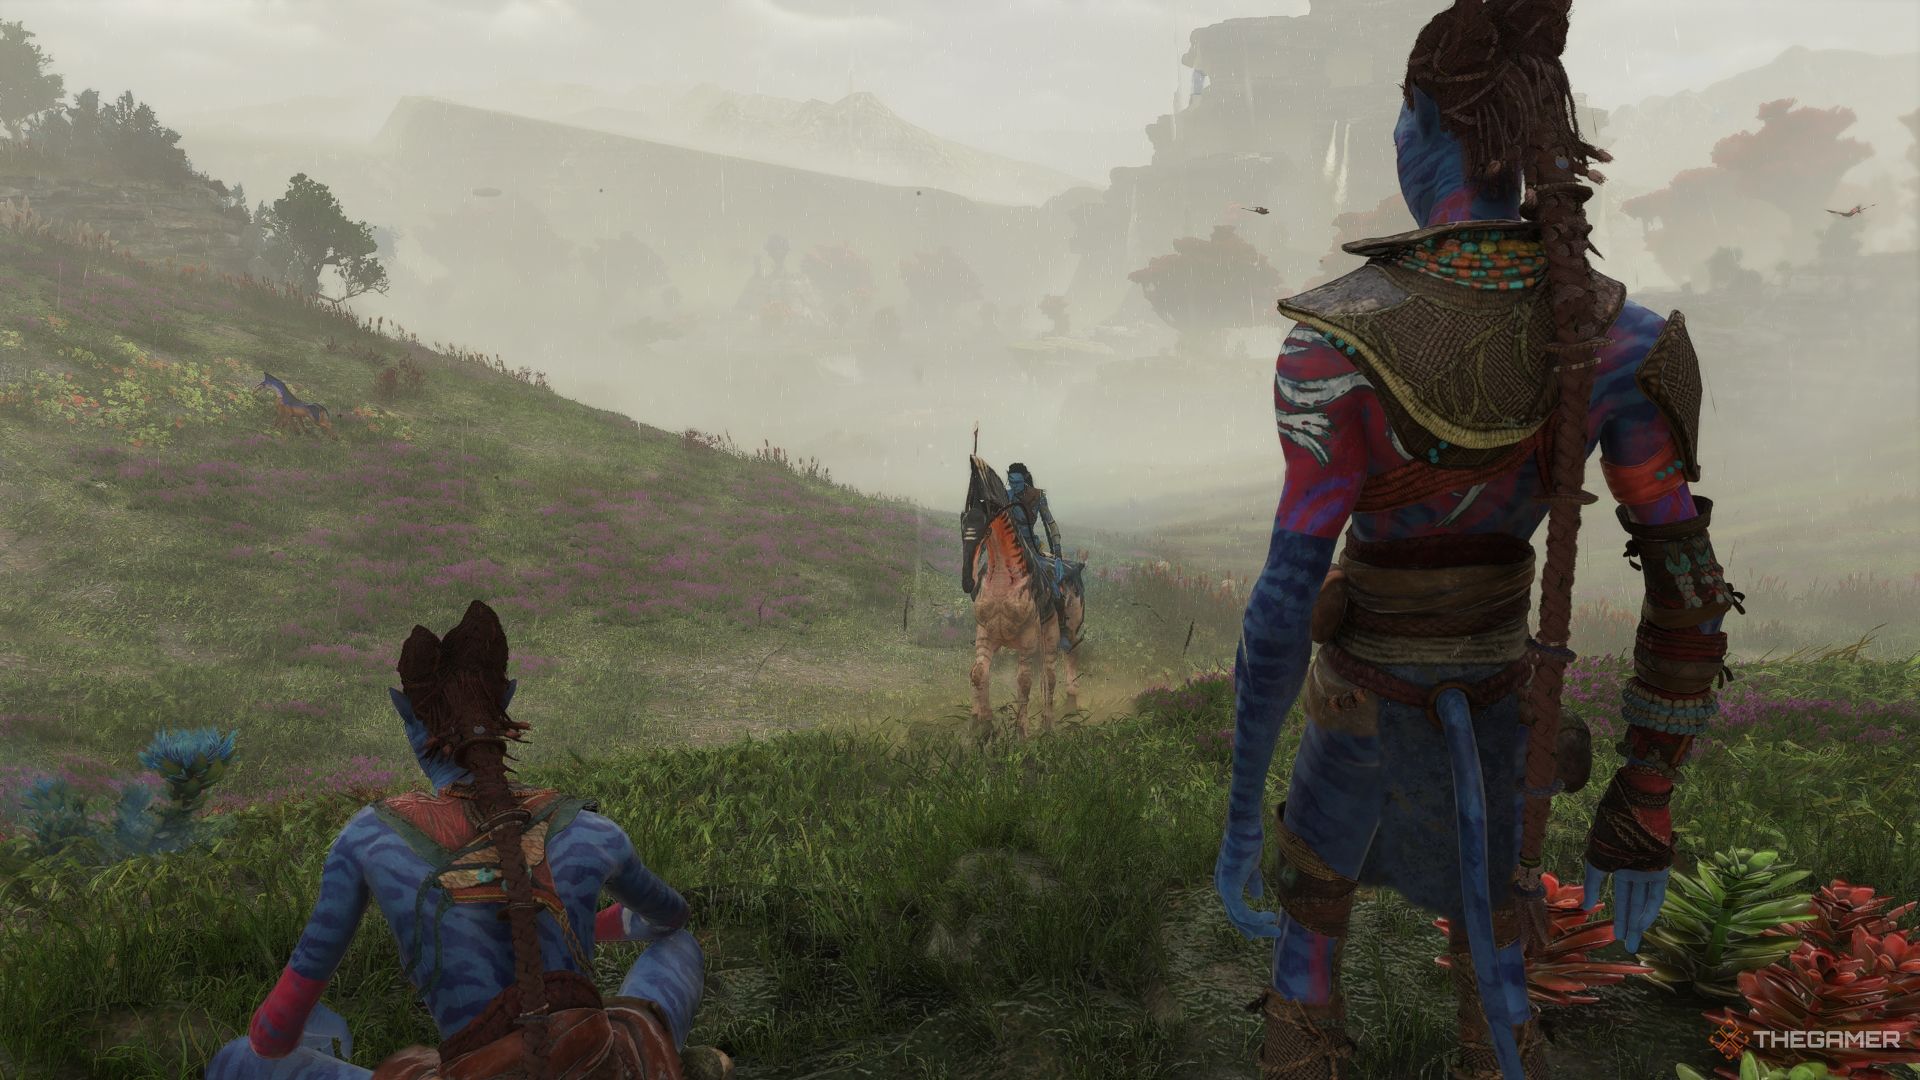 Na’vi in the field with a direhorse Avatar Frontiers of Pandora